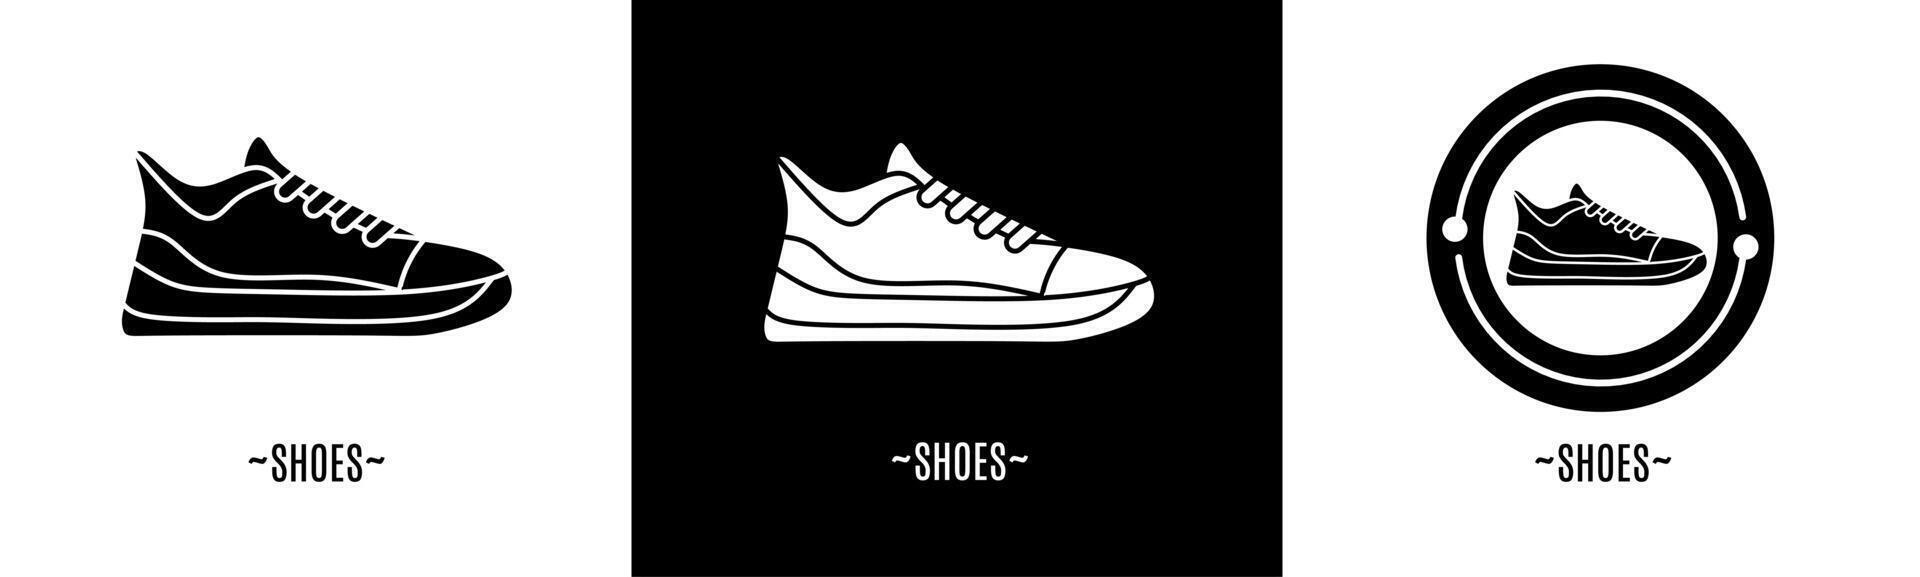 Shoes logo set. Collection of black and white logos. Stock vector. vector